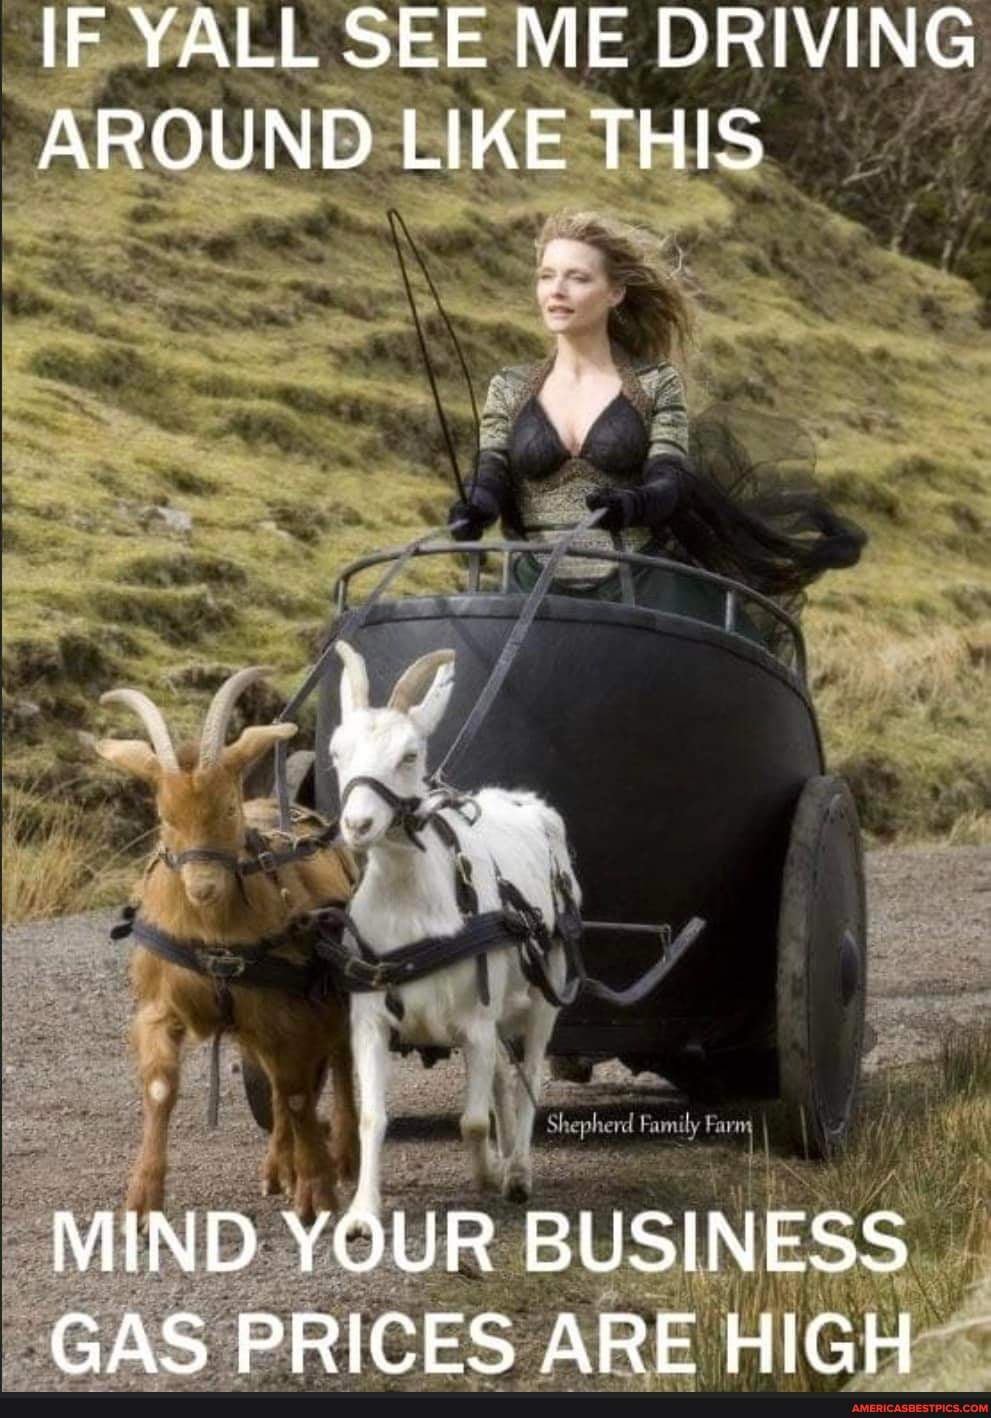 A woman rides a Roman chariot pulled by two goats, one white and one tan and both with horns. The meme has the words: "If yall see me driving around like this, mind your business gas prices are high